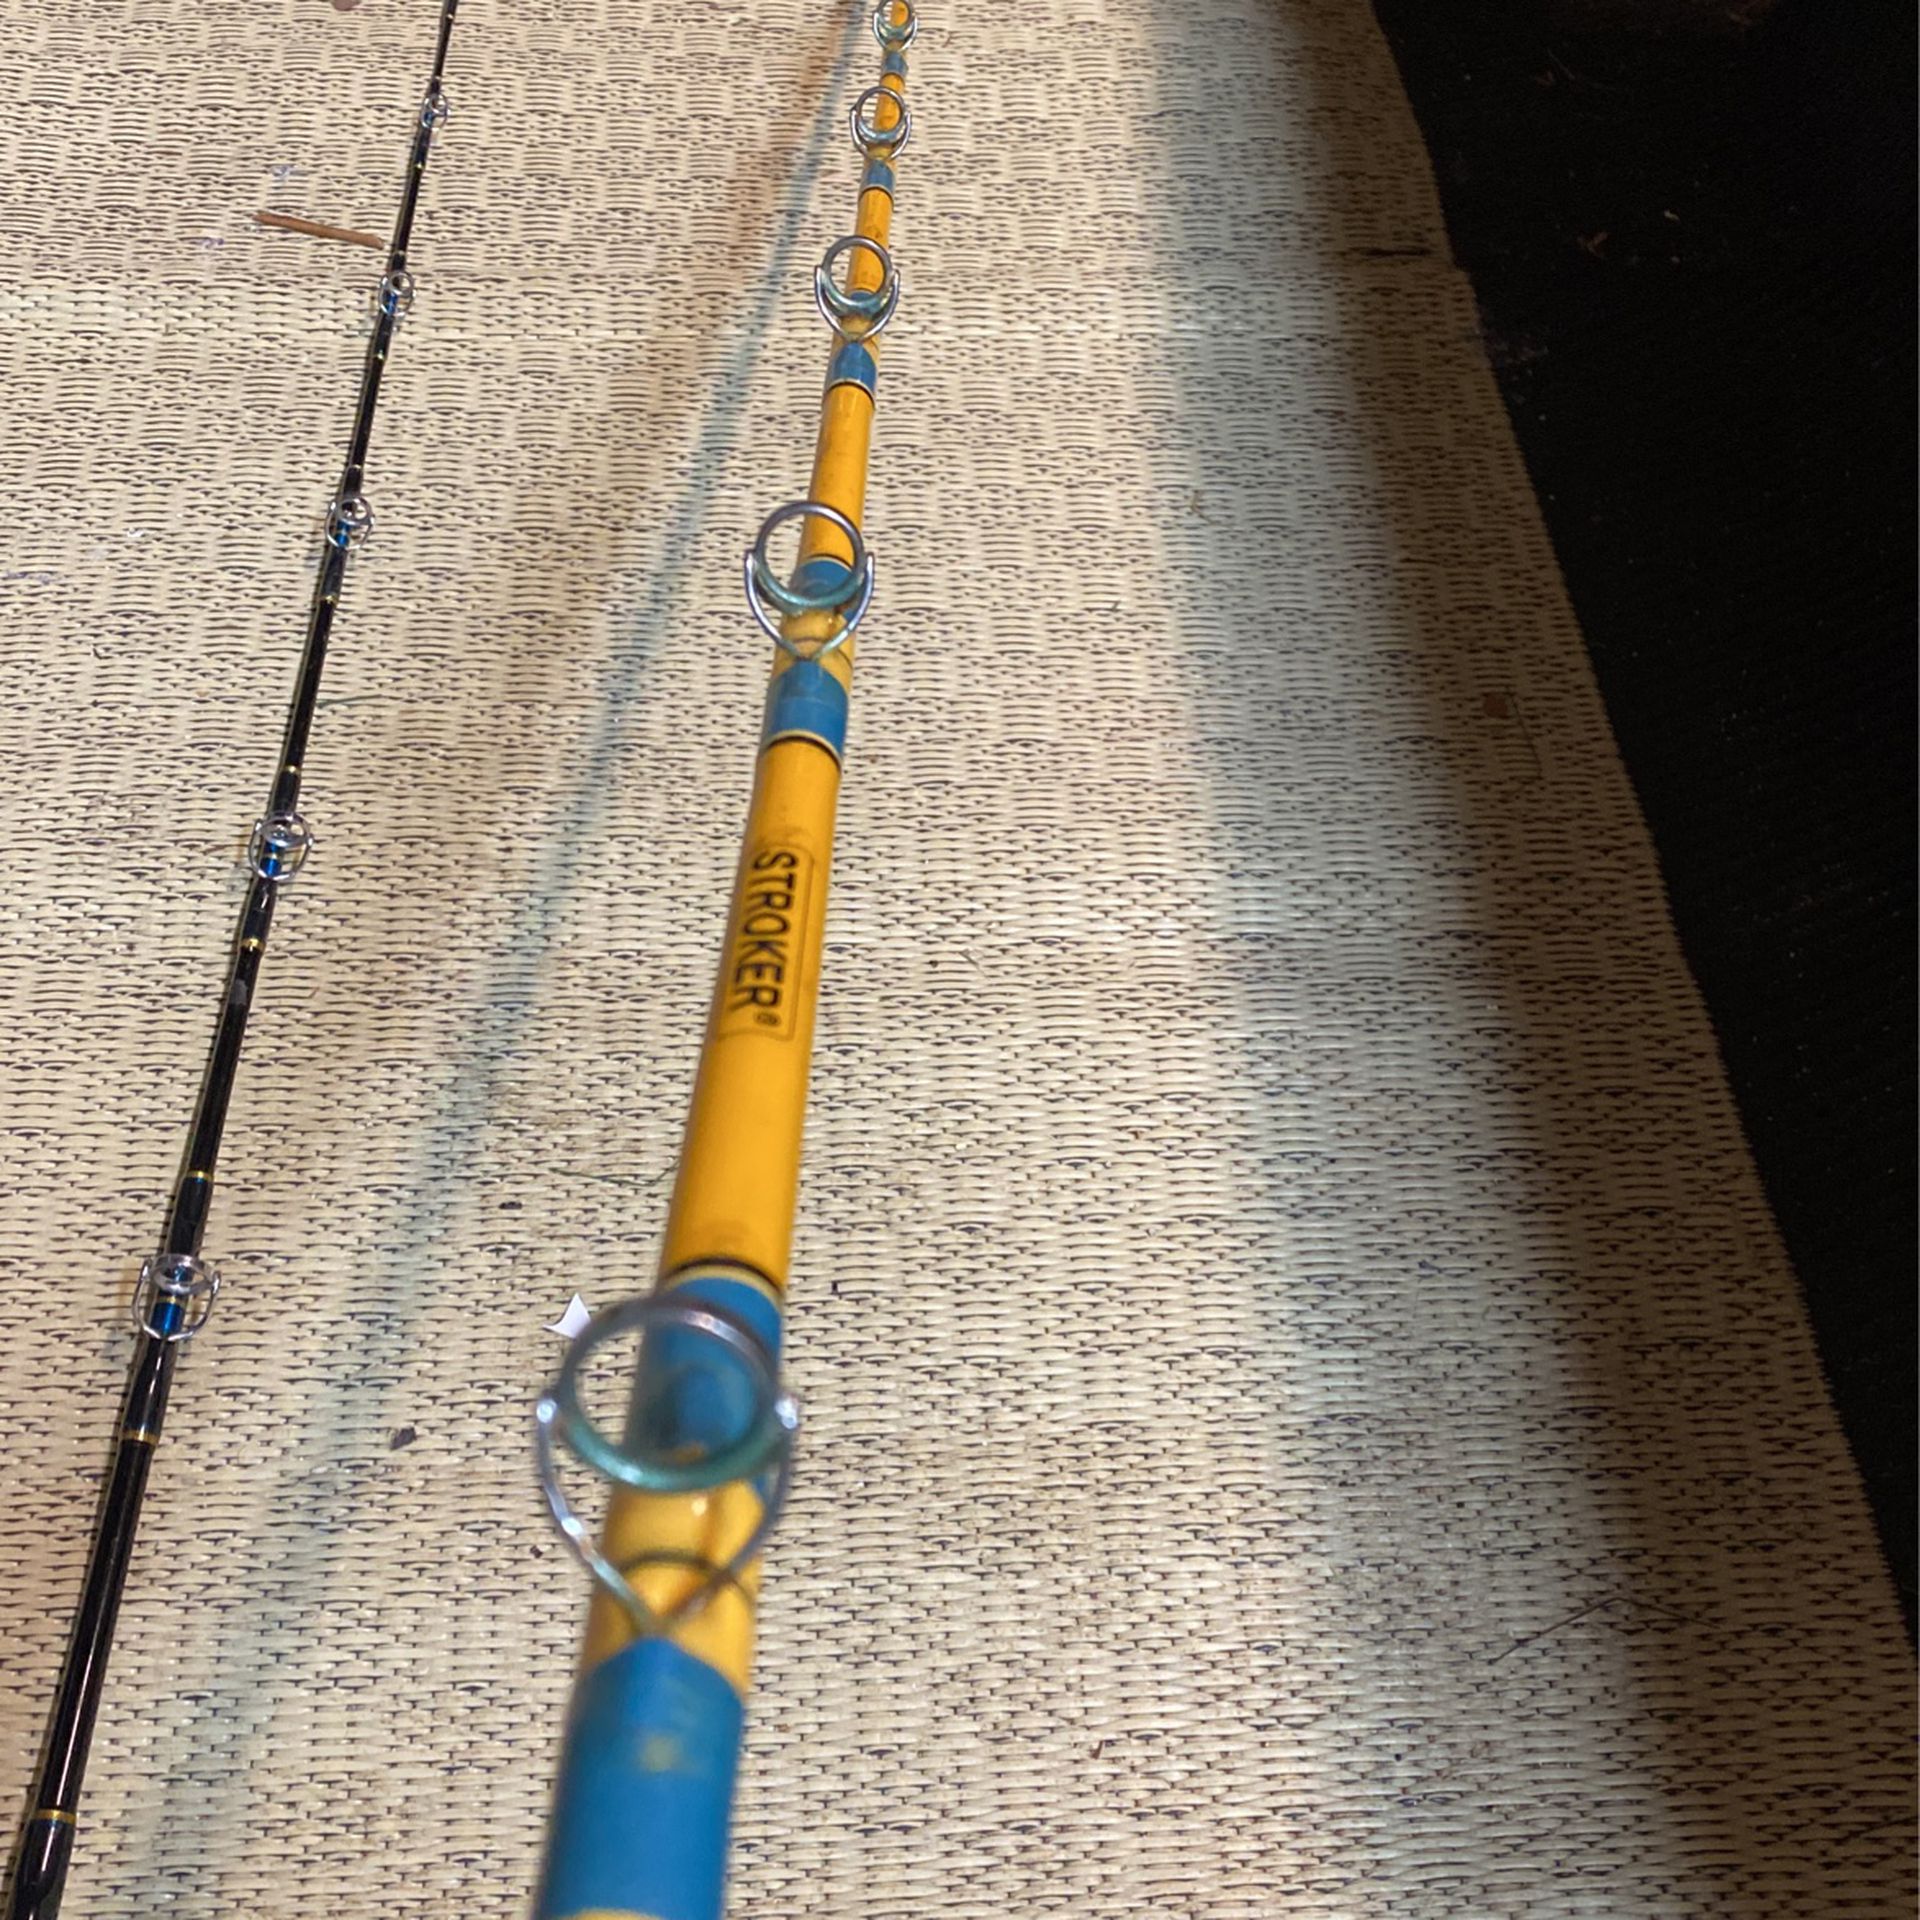 Selling 2 Ocean Rod Combos $150 For Both